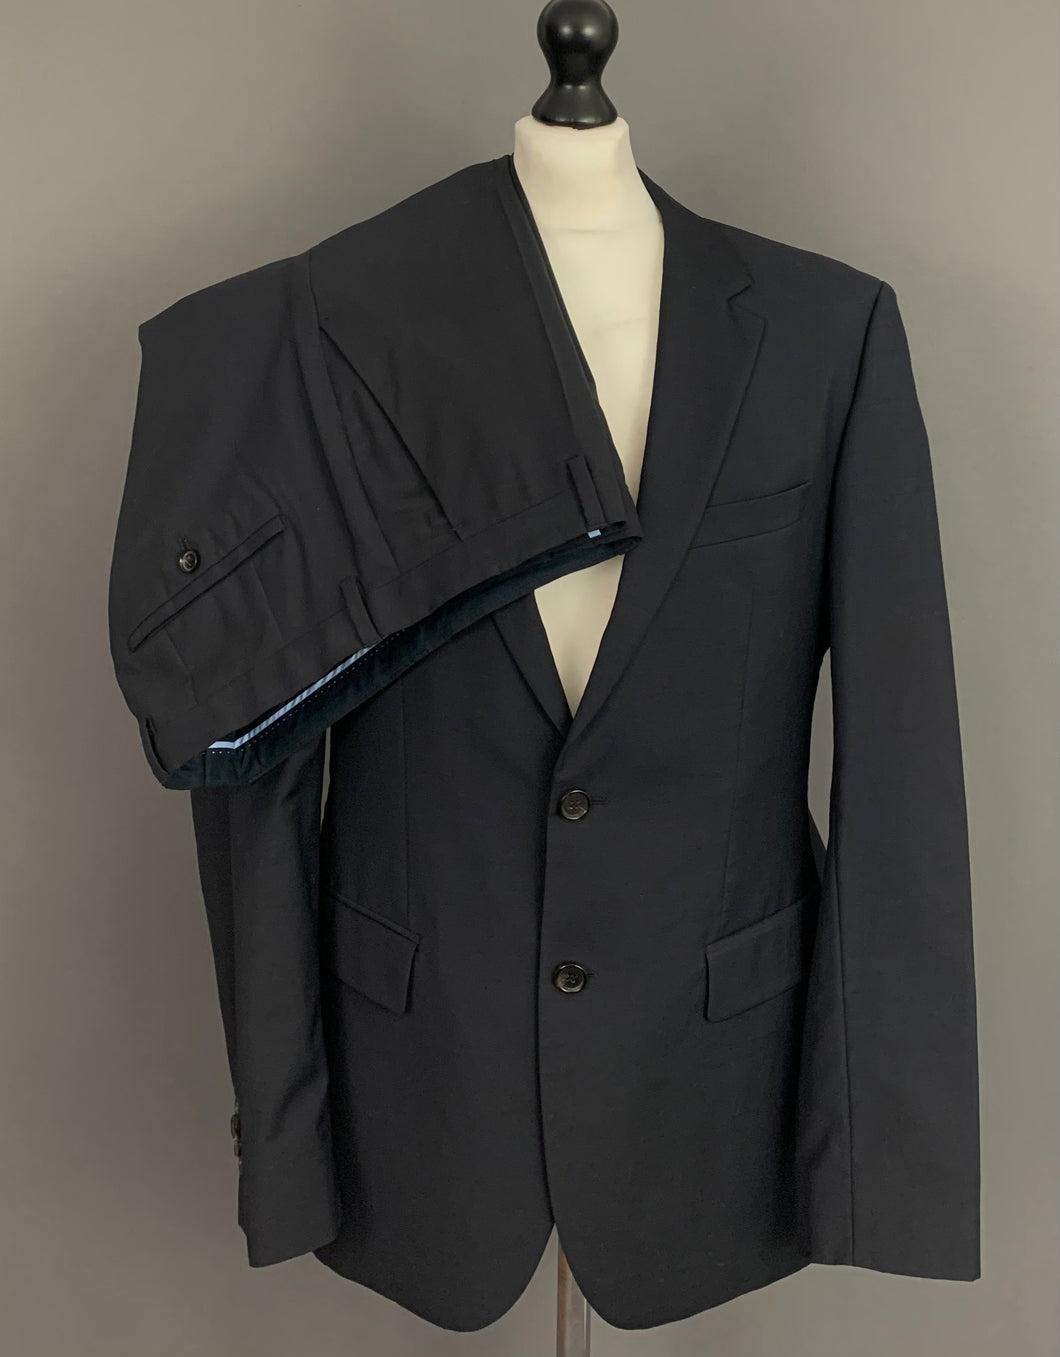 HUGO BOSS SUIT - THE GRAND CENTRAL - Size IT 48 - 38